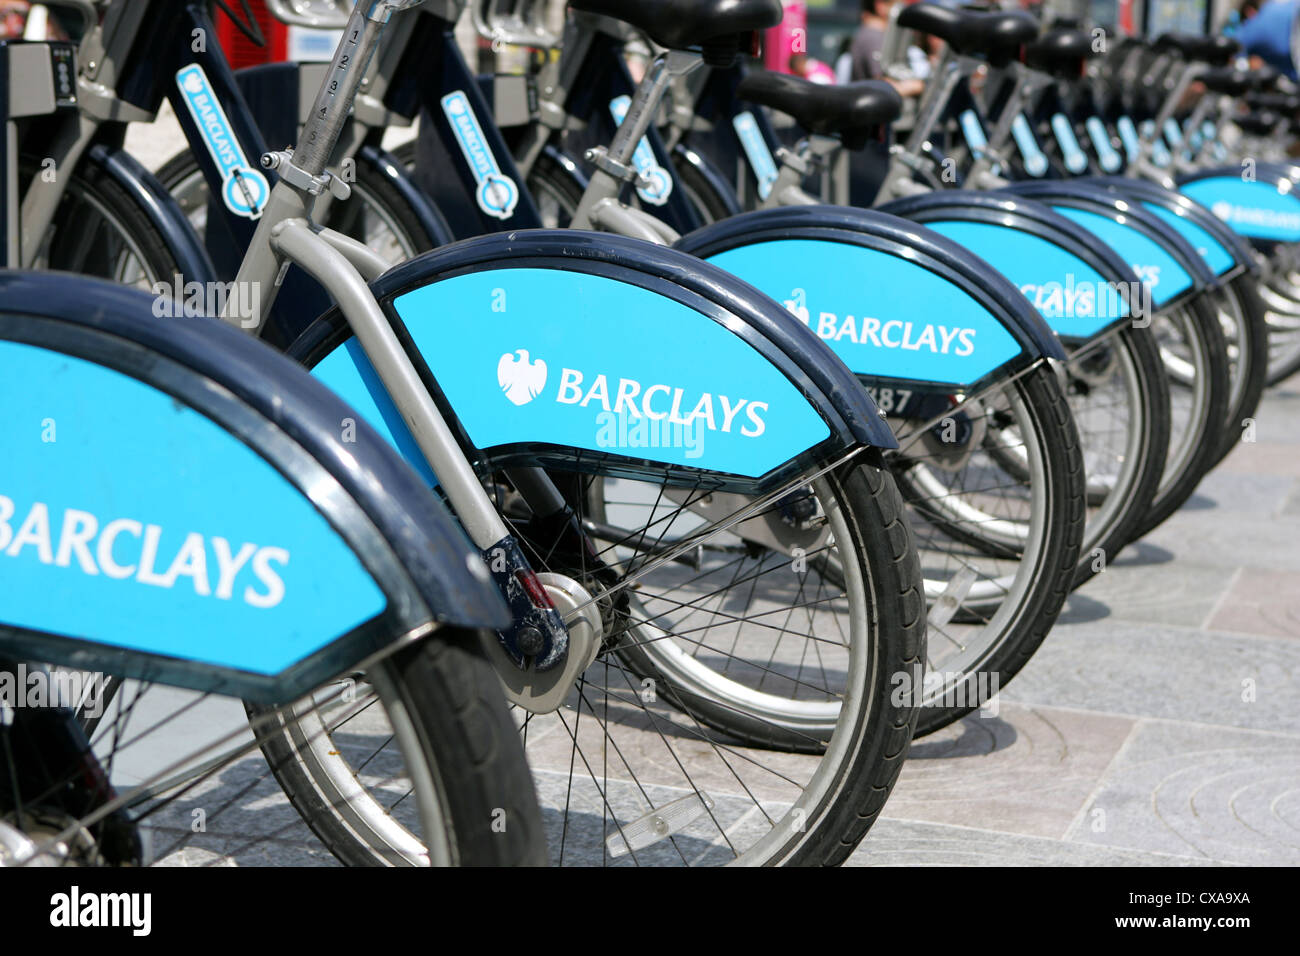 london bikes for hire - sponsored by barclays - london cycle hire at green lane, london. Stock Photo